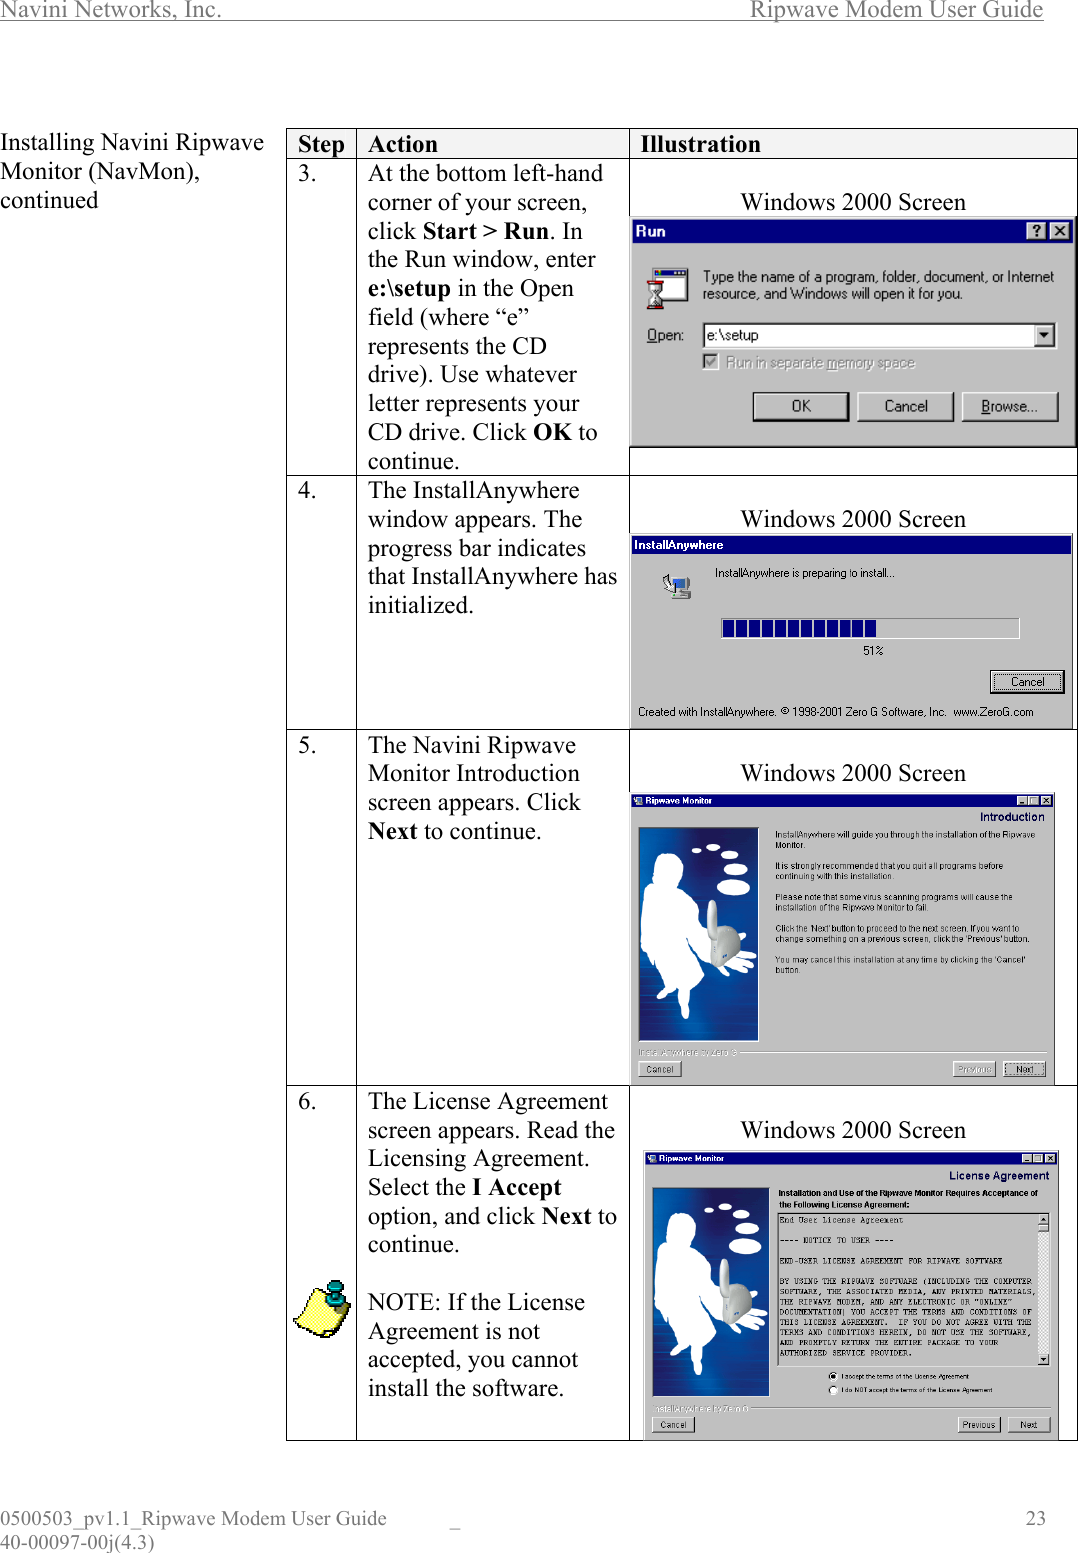 Navini Networks, Inc.        Ripwave Modem User Guide 0500503_pv1.1_Ripwave Modem User Guide  _                                    23 40-00097-00j(4.3)  Installing Navini Ripwave Monitor (NavMon), continued                                            Step  Action  Illustration 3. At the bottom left-hand corner of your screen, click Start &gt; Run. In the Run window, enter e:\setup in the Open field (where “e” represents the CD drive). Use whatever letter represents your CD drive. Click OK to continue.  Windows 2000 Screen  4. The InstallAnywhere window appears. The progress bar indicates that InstallAnywhere has initialized.  Windows 2000 Screen  5. The Navini Ripwave Monitor Introduction screen appears. Click Next to continue.  Windows 2000 Screen  6.  The License Agreement screen appears. Read the Licensing Agreement. Select the I Accept option, and click Next to continue.  NOTE: If the License Agreement is not accepted, you cannot install the software.  Windows 2000 Screen  